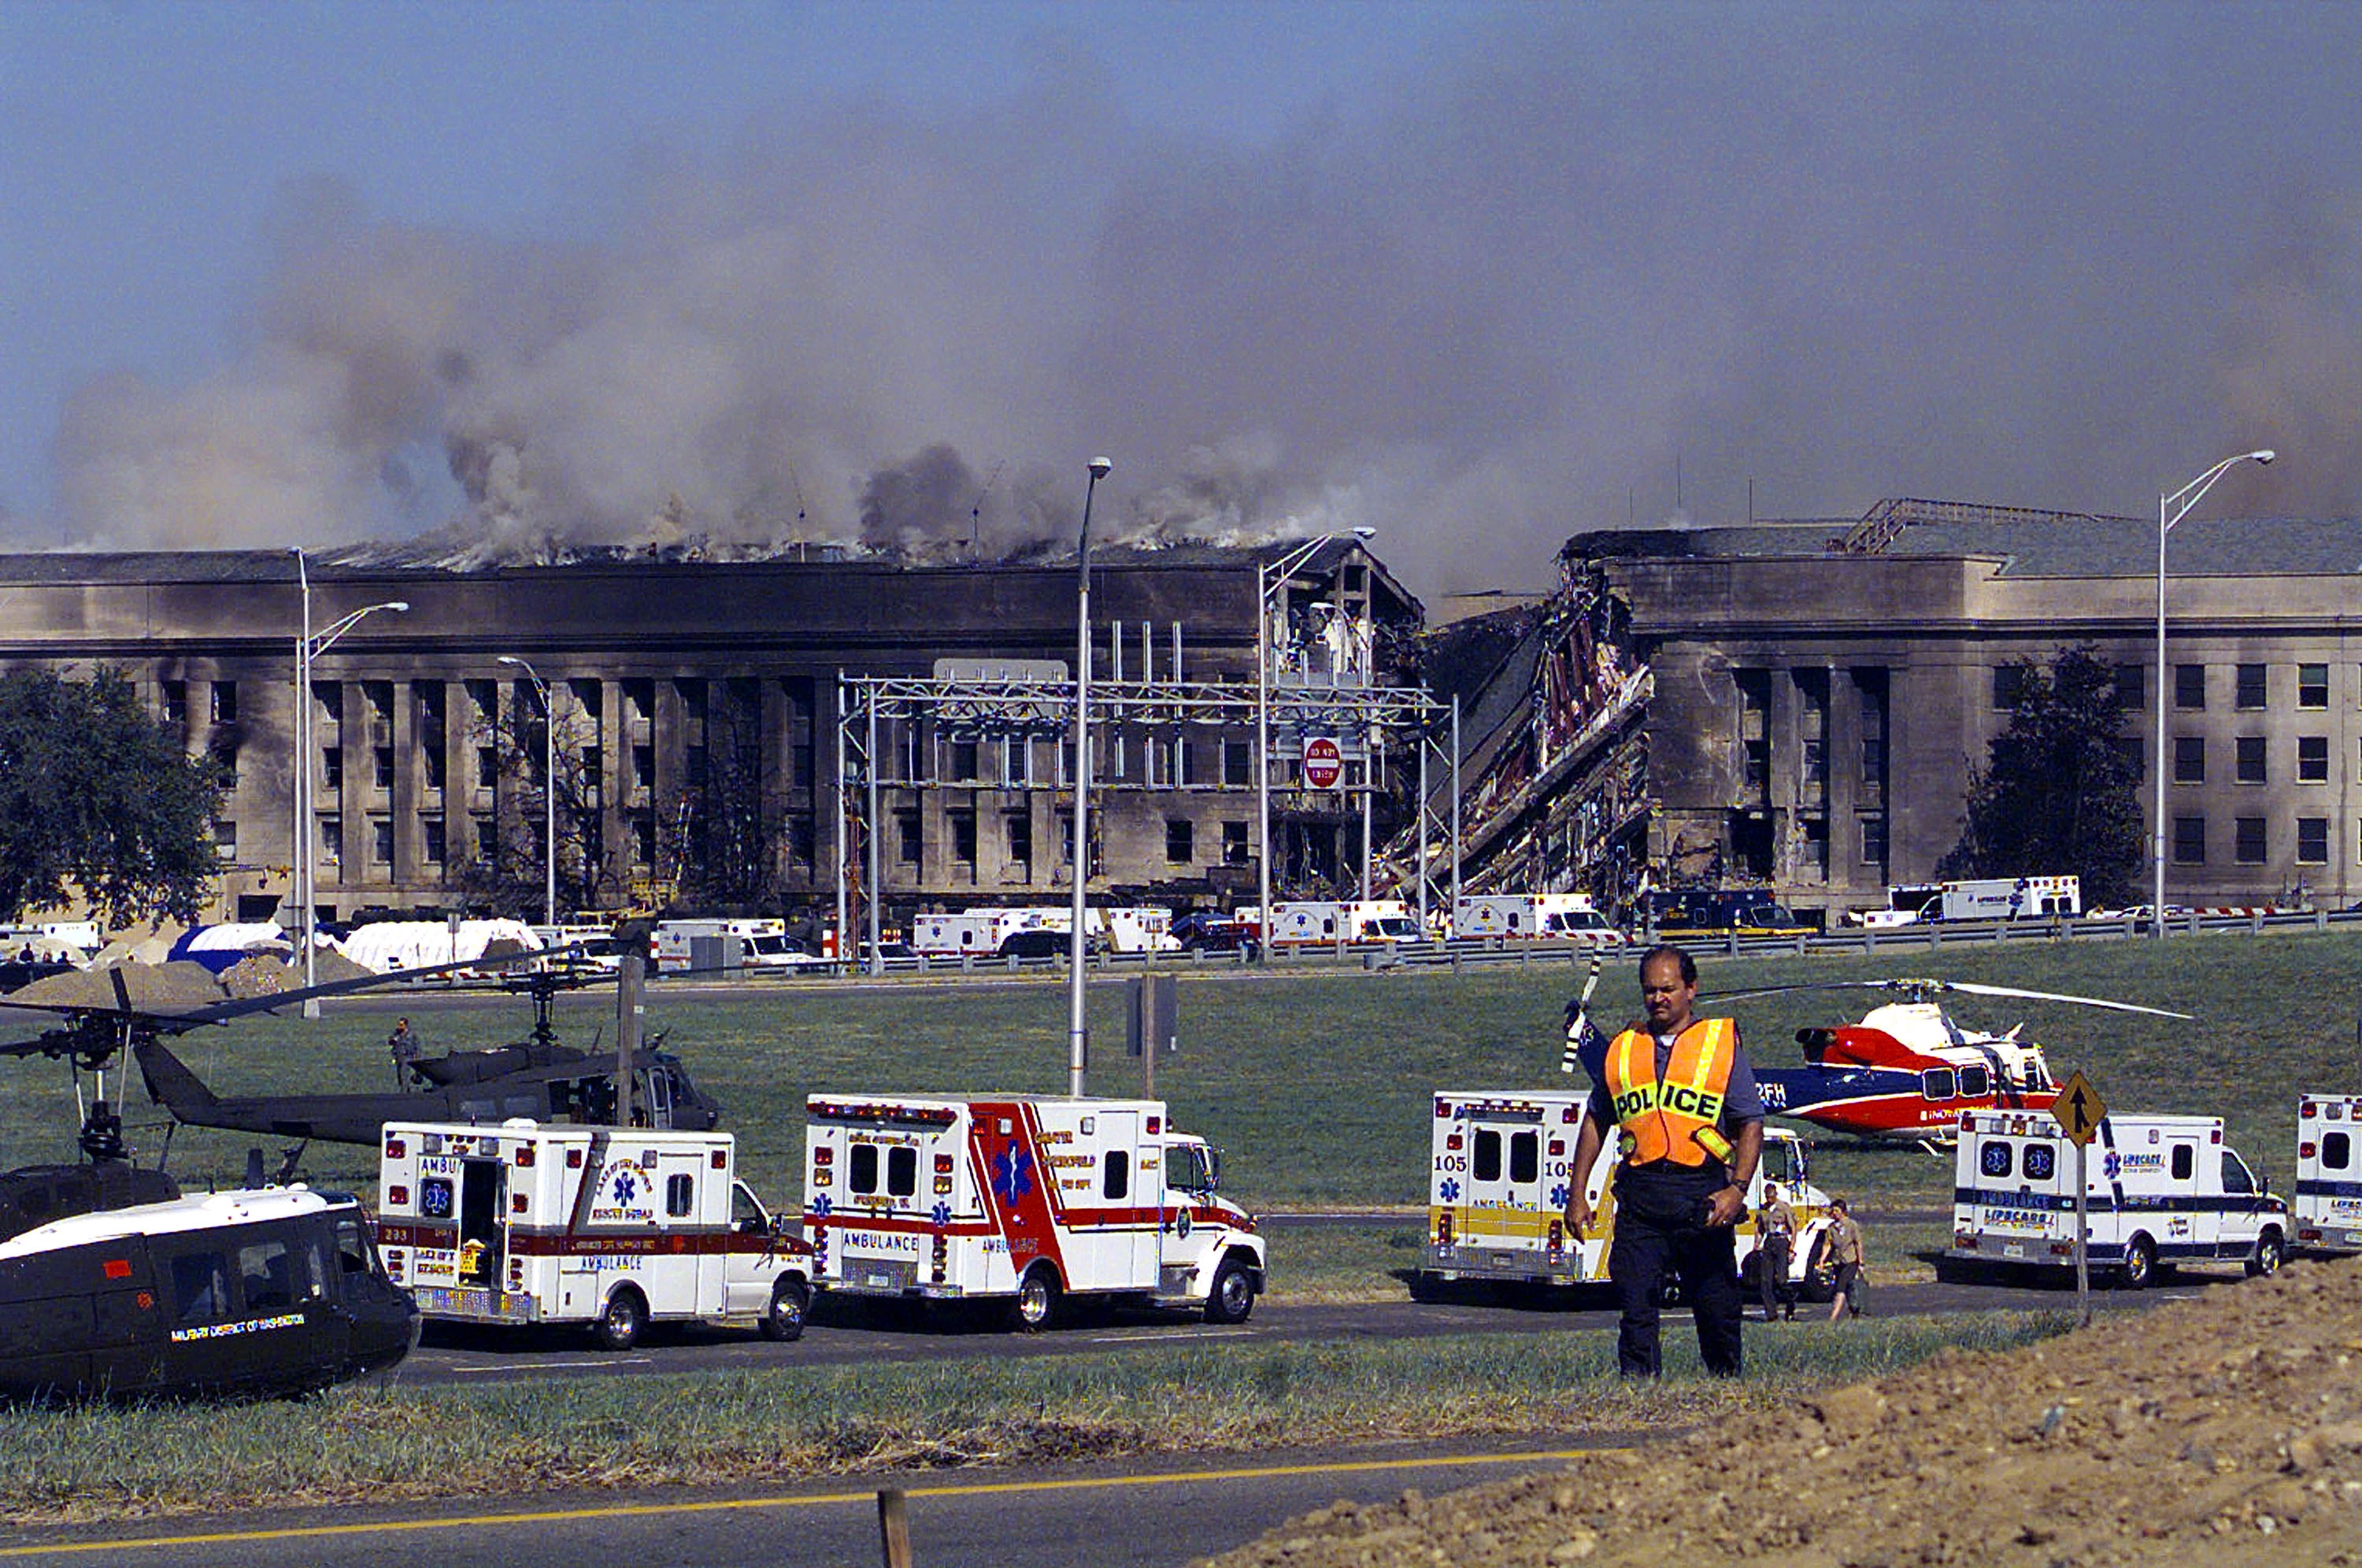 394422 05: Smoke And Flames Rise Over The Pentagon At About 10 A.M. Est September 11, 2001 Following A Suspected Terrorist Crash Of A Hijacked Commercial Airliner Into The South Side Of The Pentagon In Arlington, Va. The Attack Came At Approximately 9:40 A.M. As The Plane, Originating From Washington D.C.'s Dulles Airport, Was Flown Into The Southern Side Of The Building. (Photo By U.S. Navy/Getty Images)